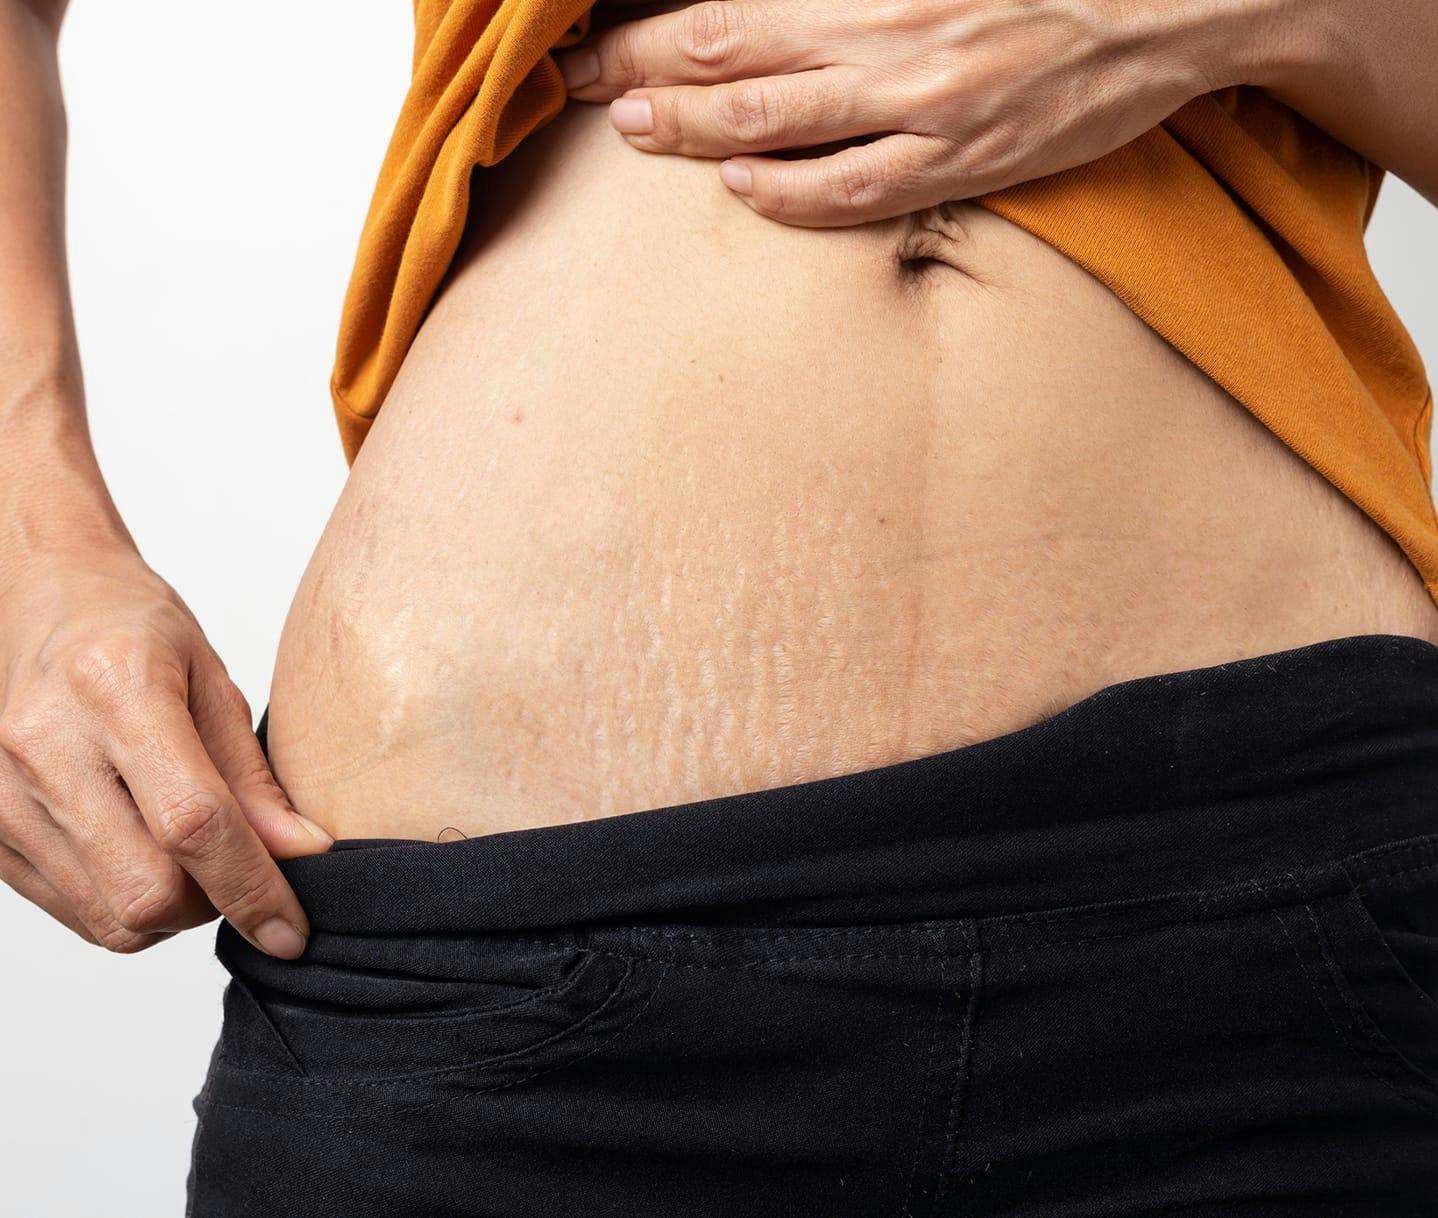 Best Candidates For Tummy Tuck